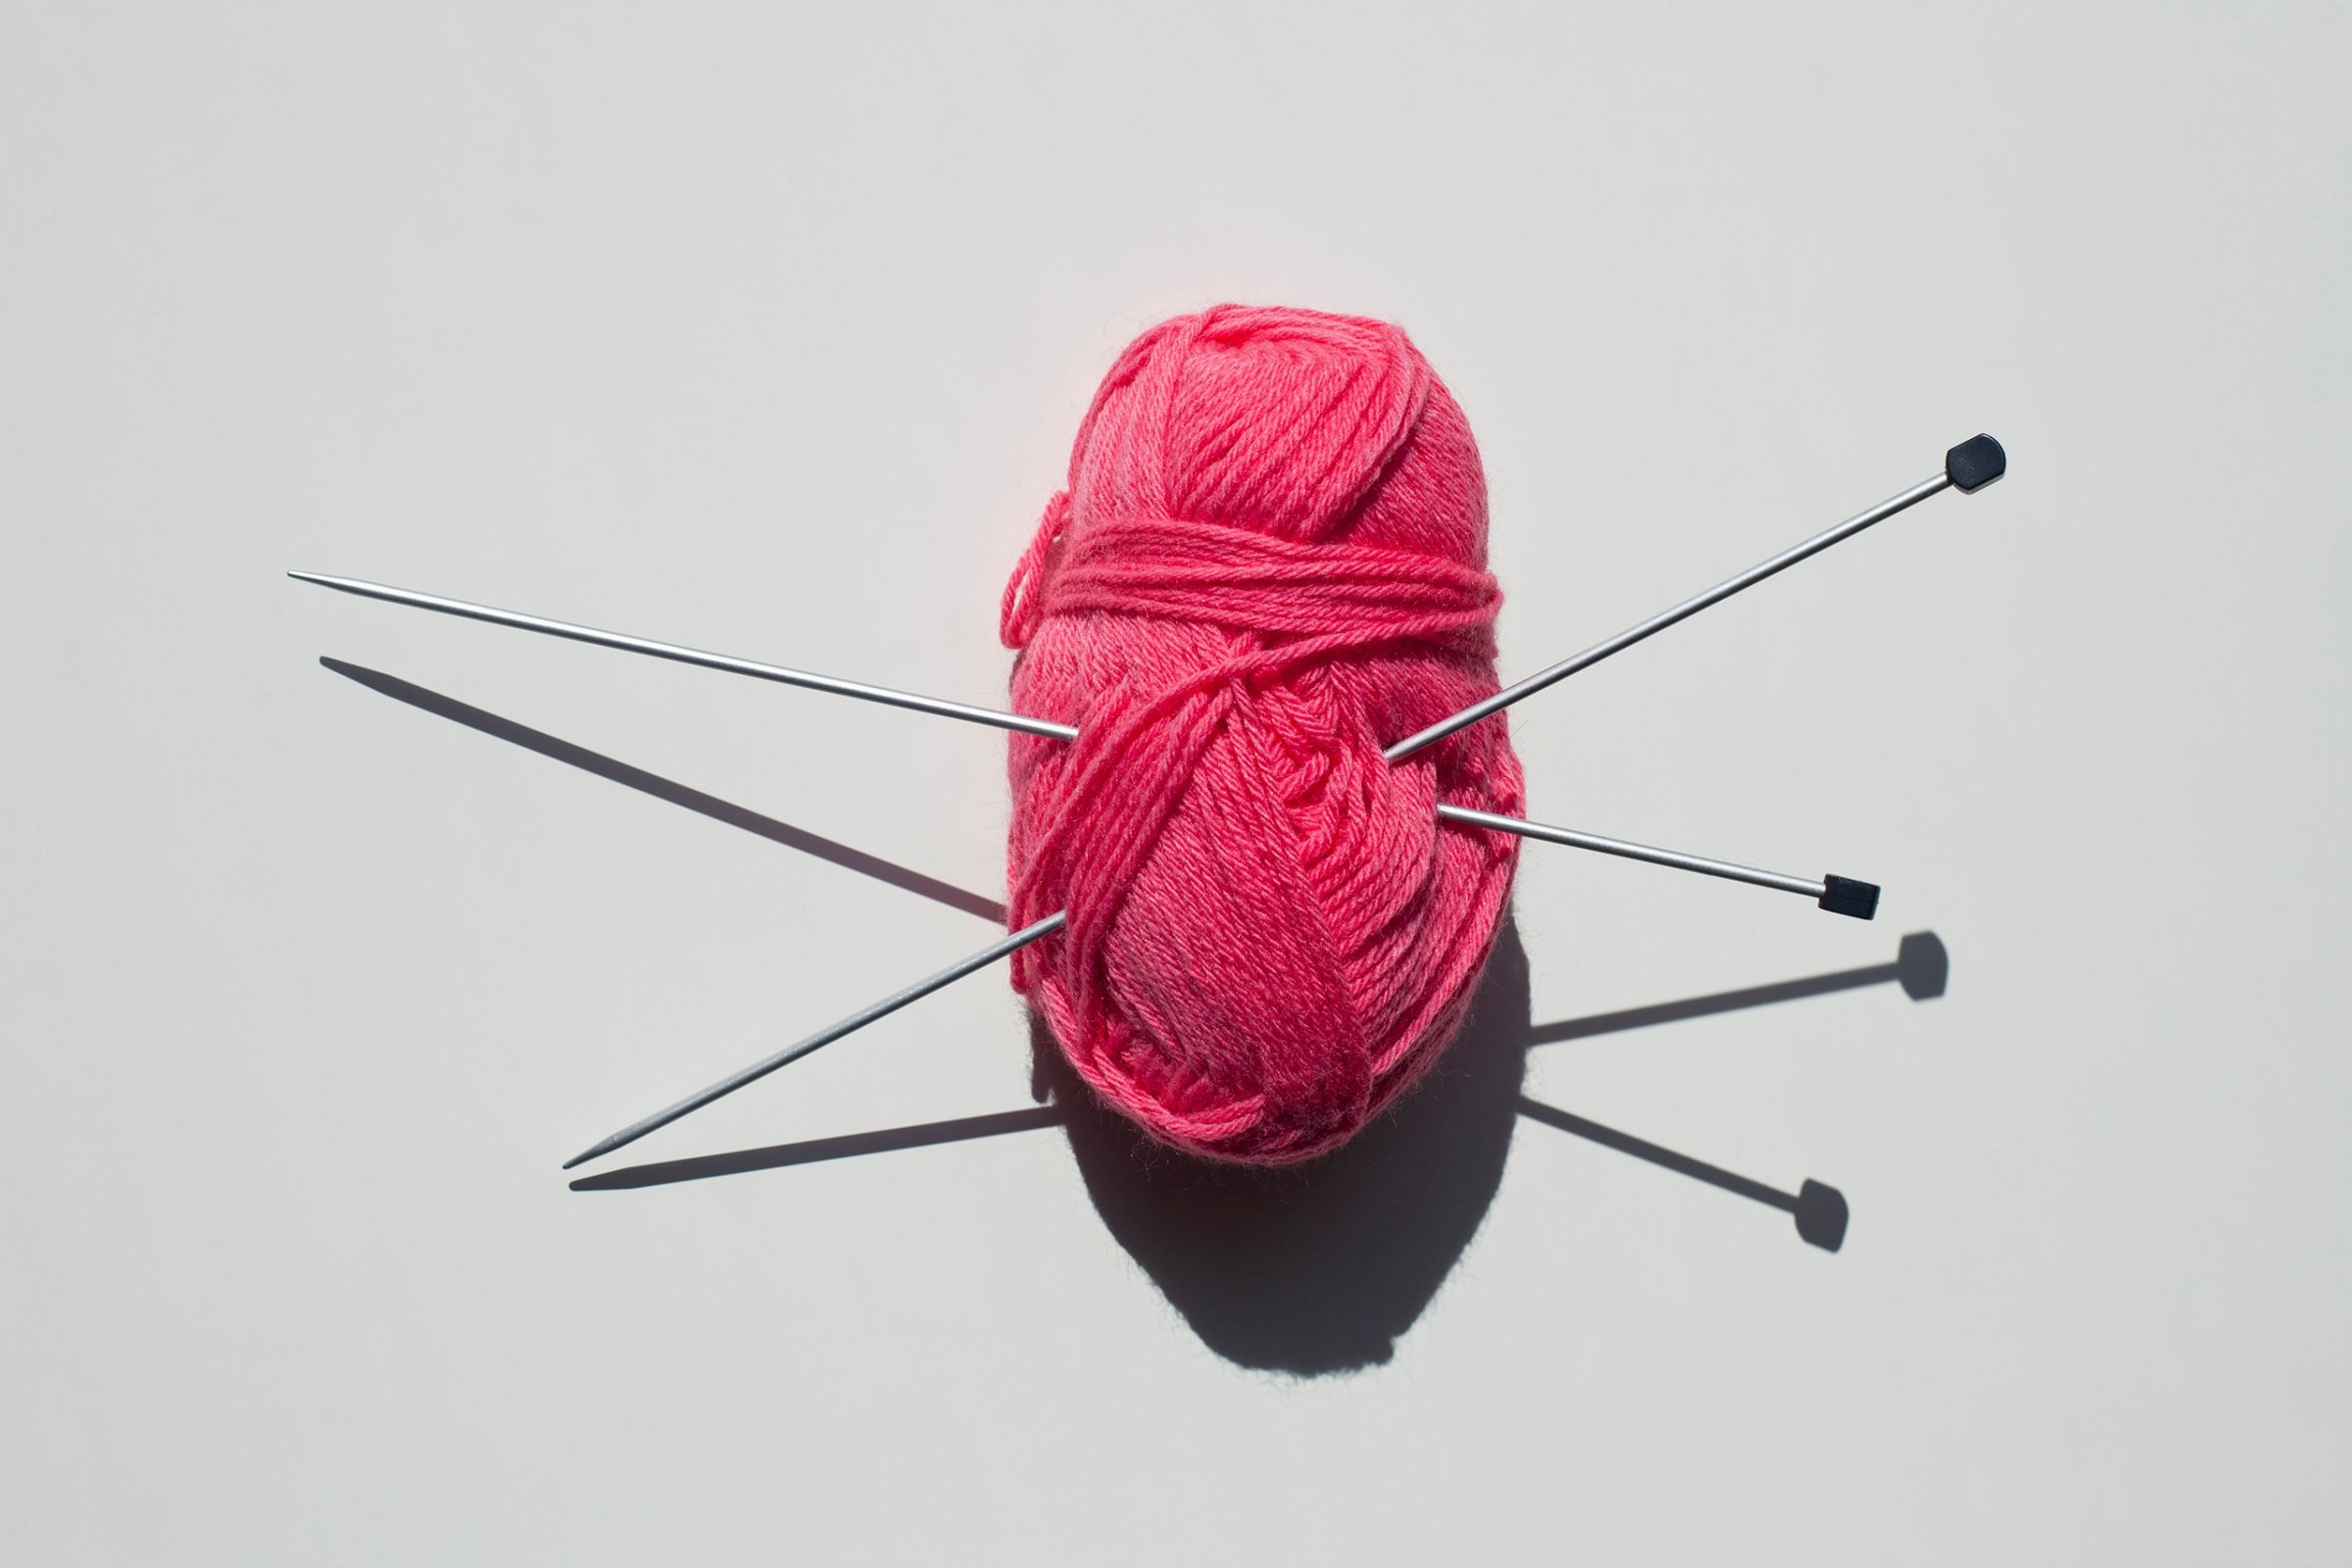 A pair of knitting needles stuck into a ball of yarn